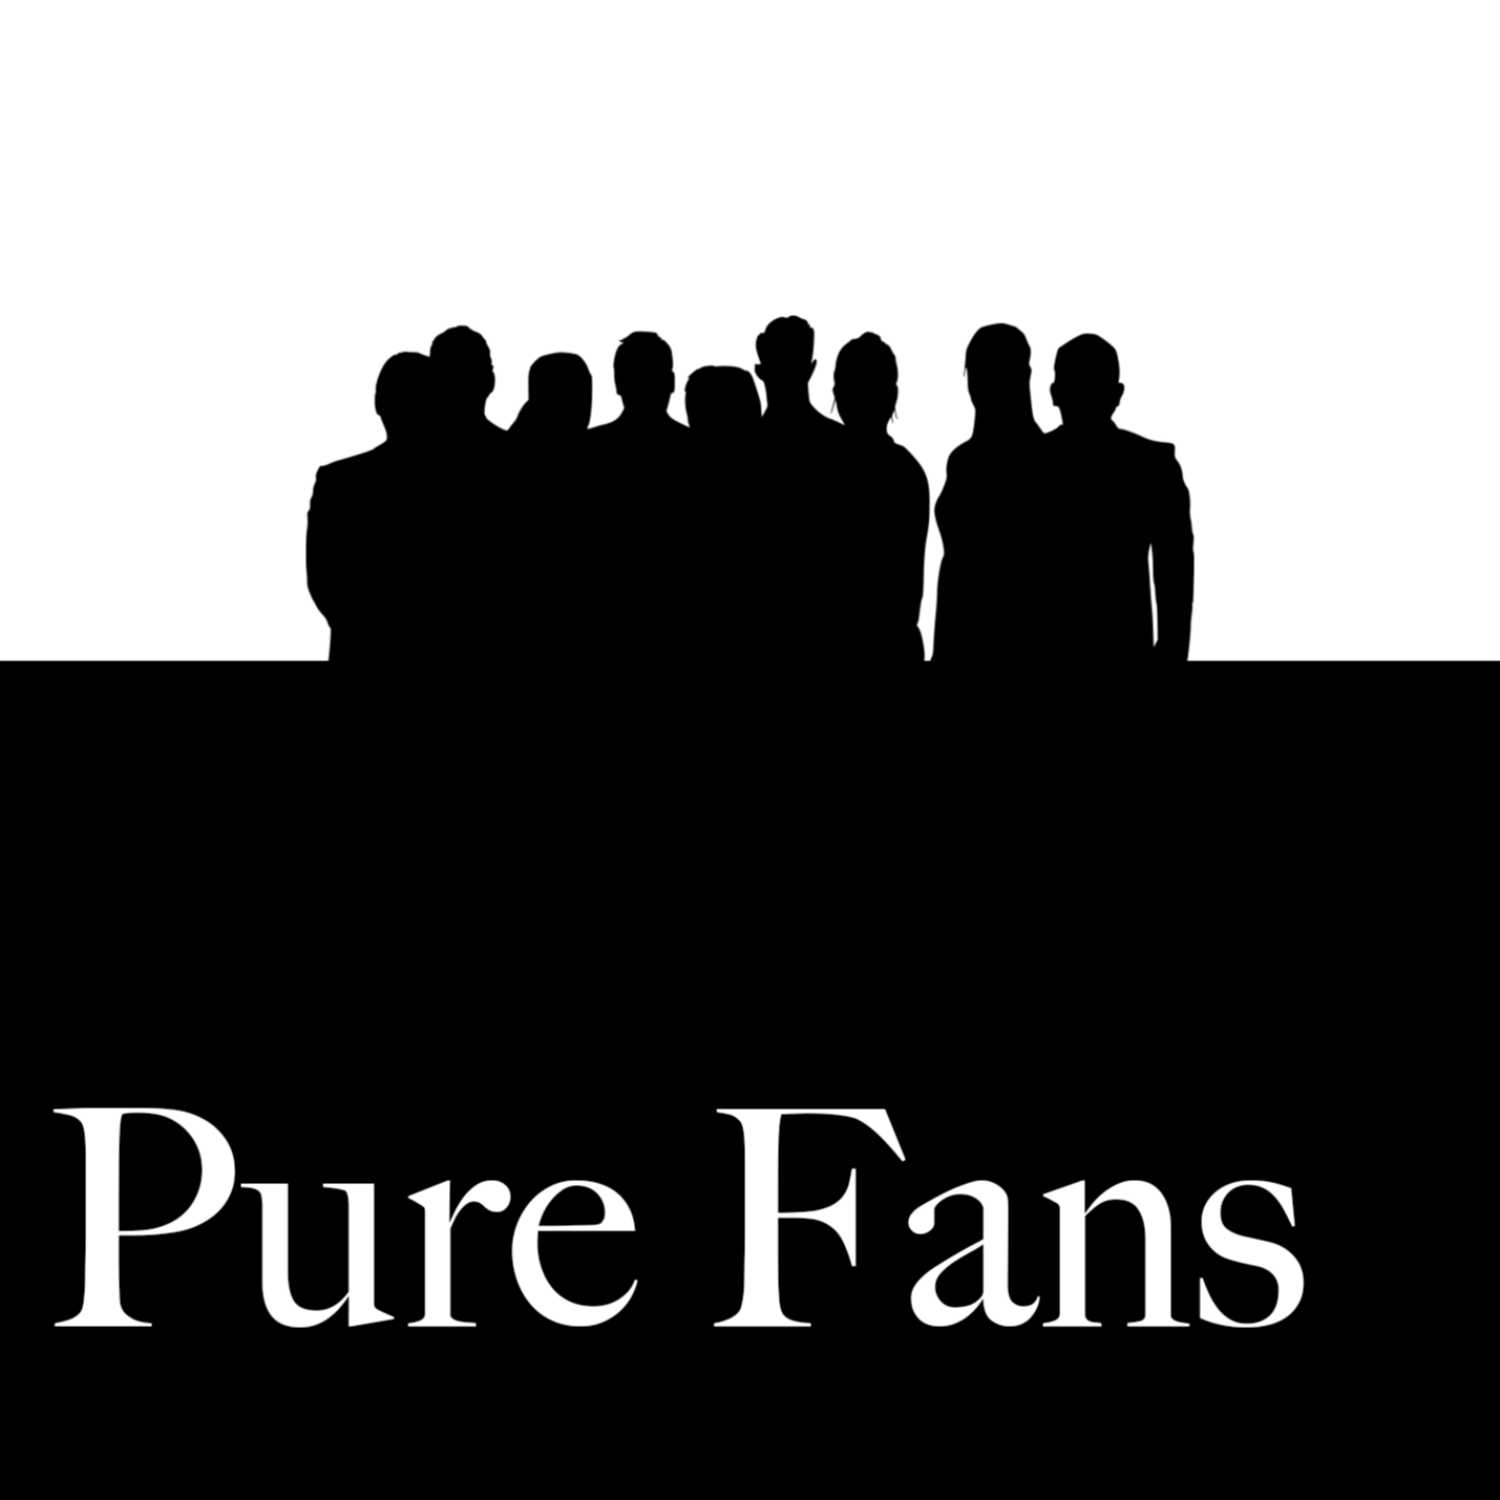 Introducing Pure Fans with Chris